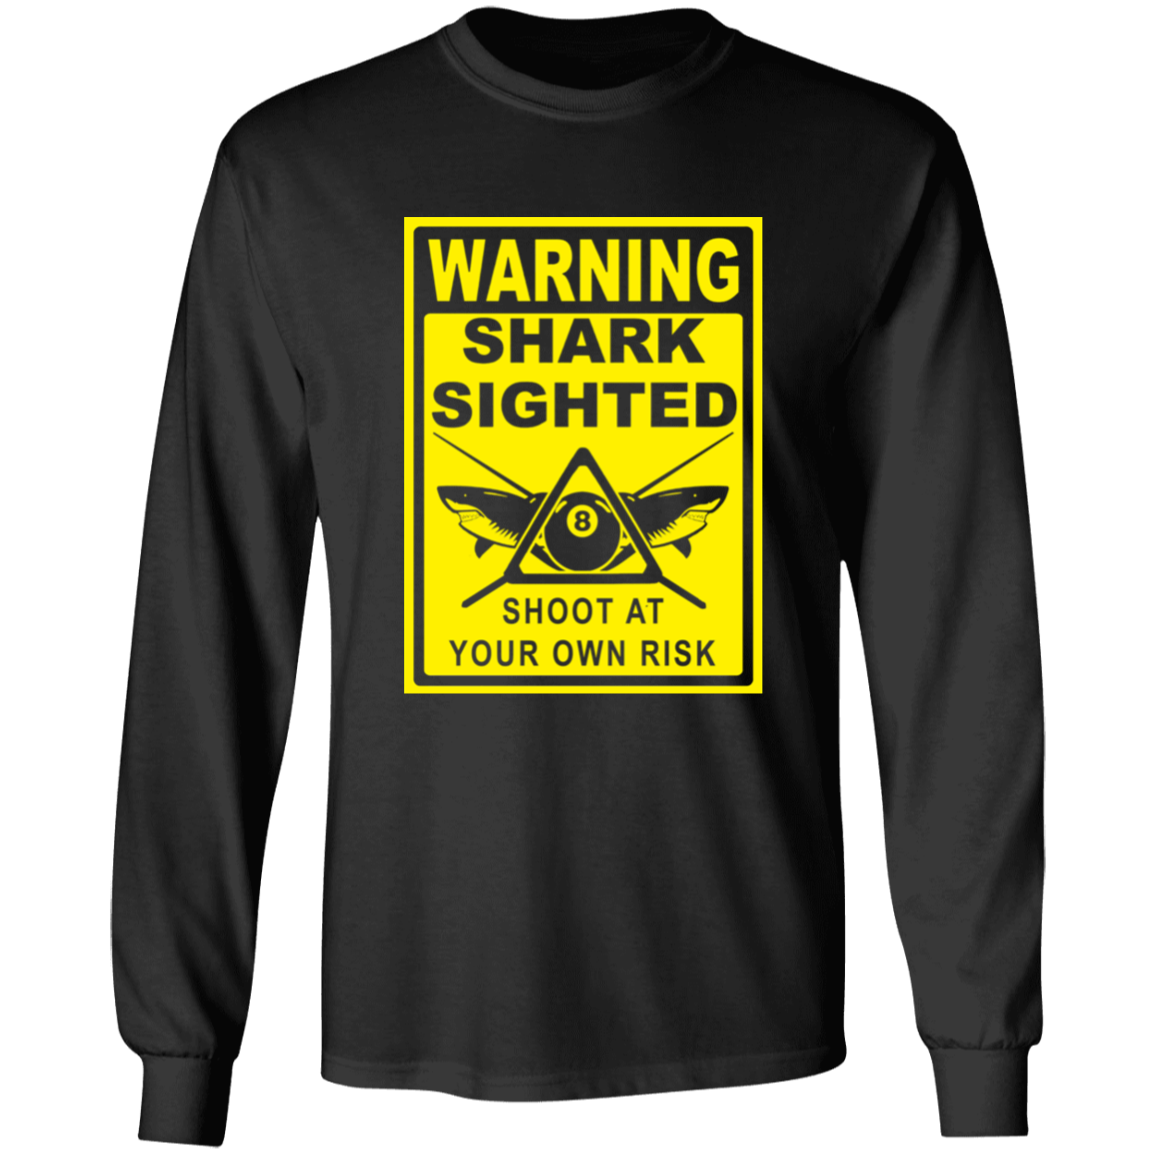 The GHOATS Custom Design #35. Beware of Sharks. Shoot at Your Own Risk. 100% Basic Cotton Long Sleeve